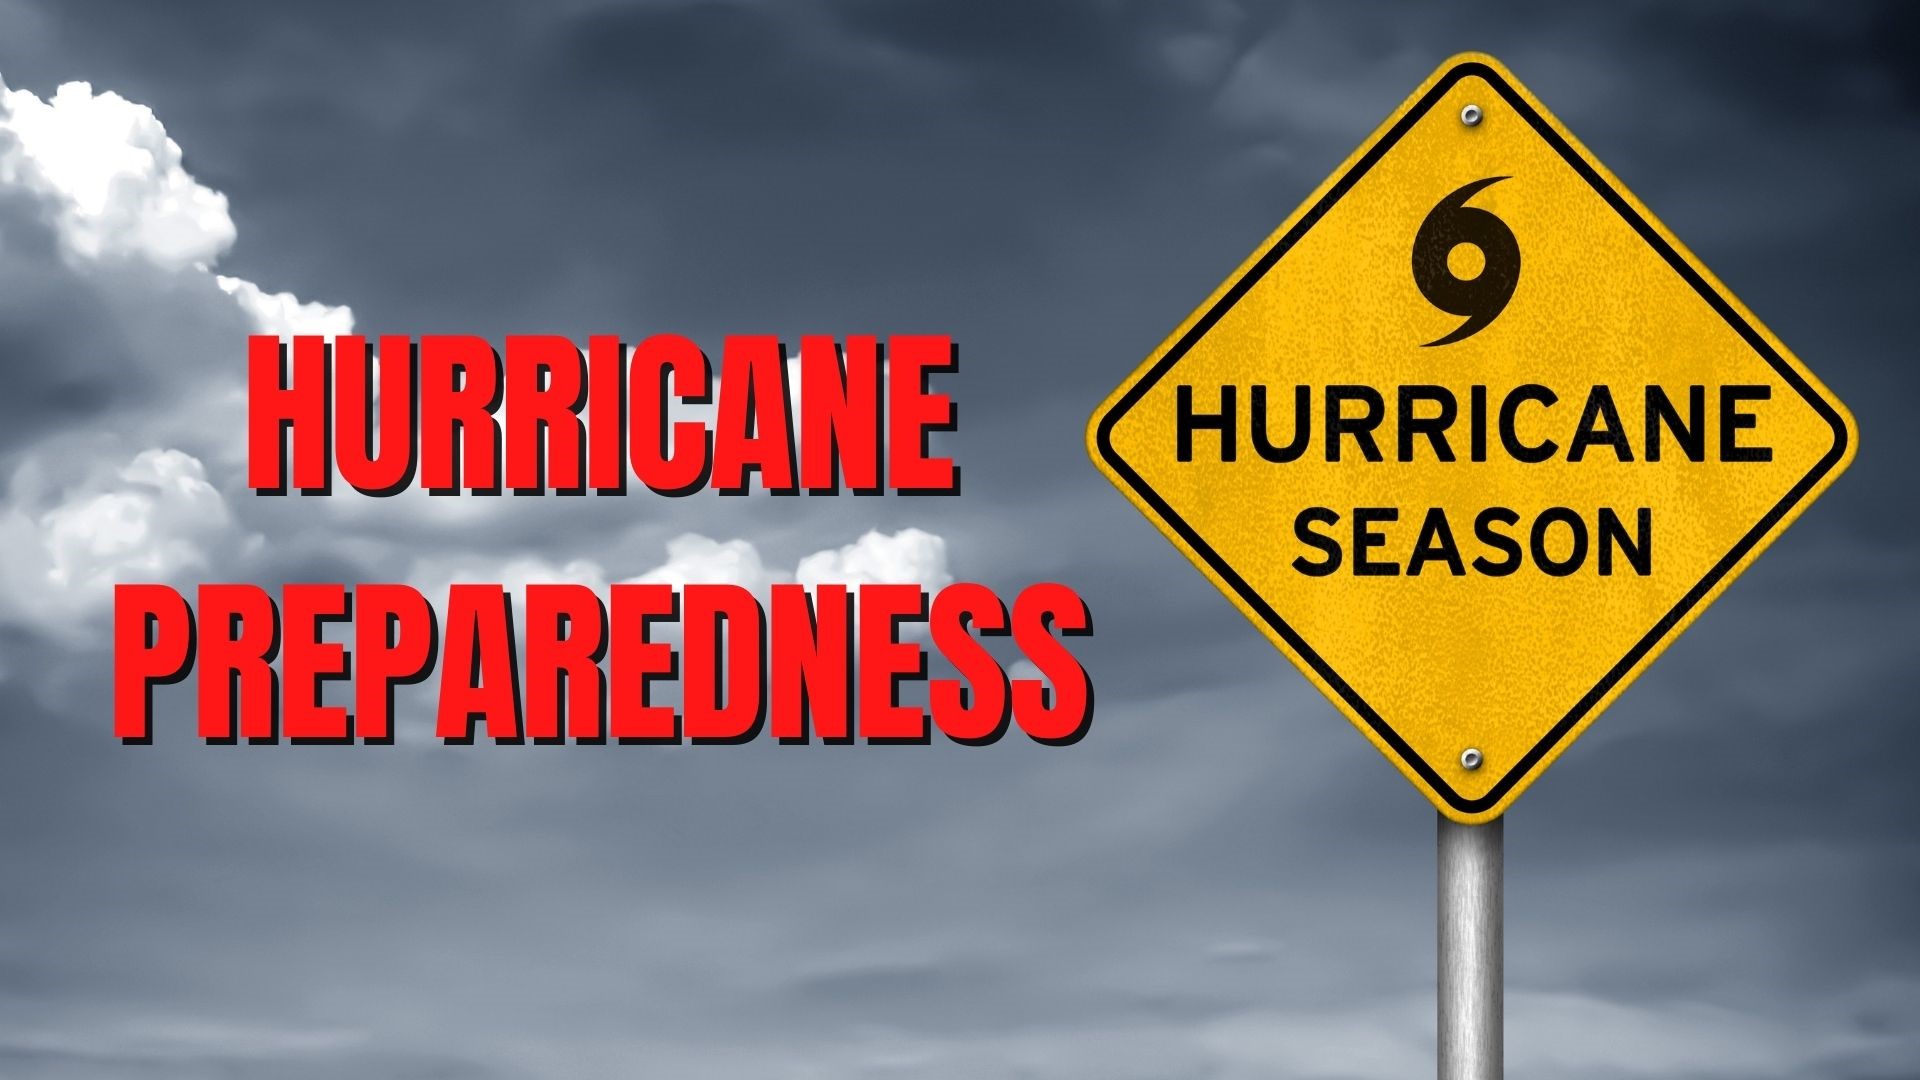 Having an hurricane readiness plan could make the difference in getting through a storm with ease or suffering major losses.